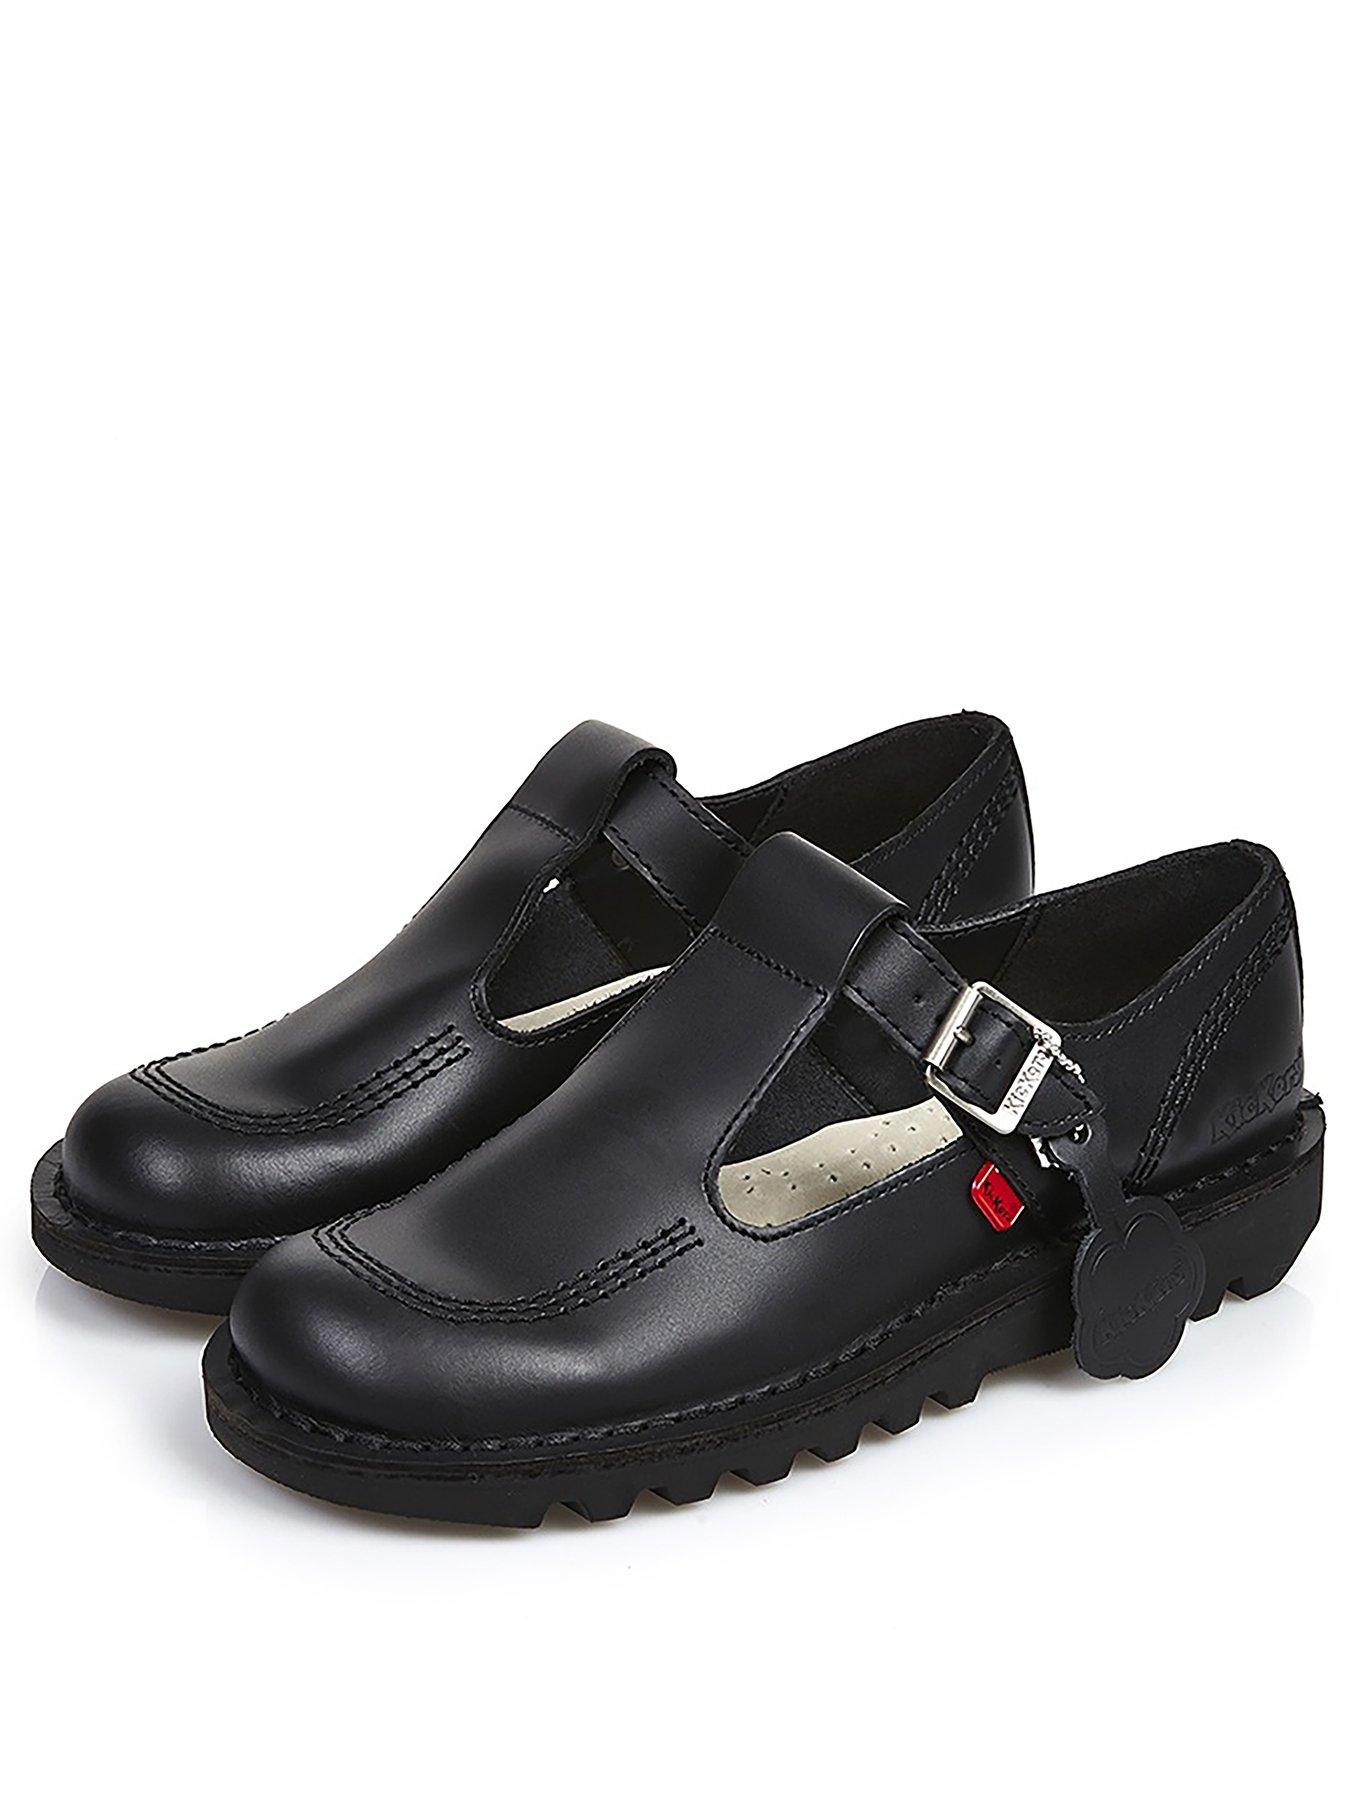 kickers loafers womens